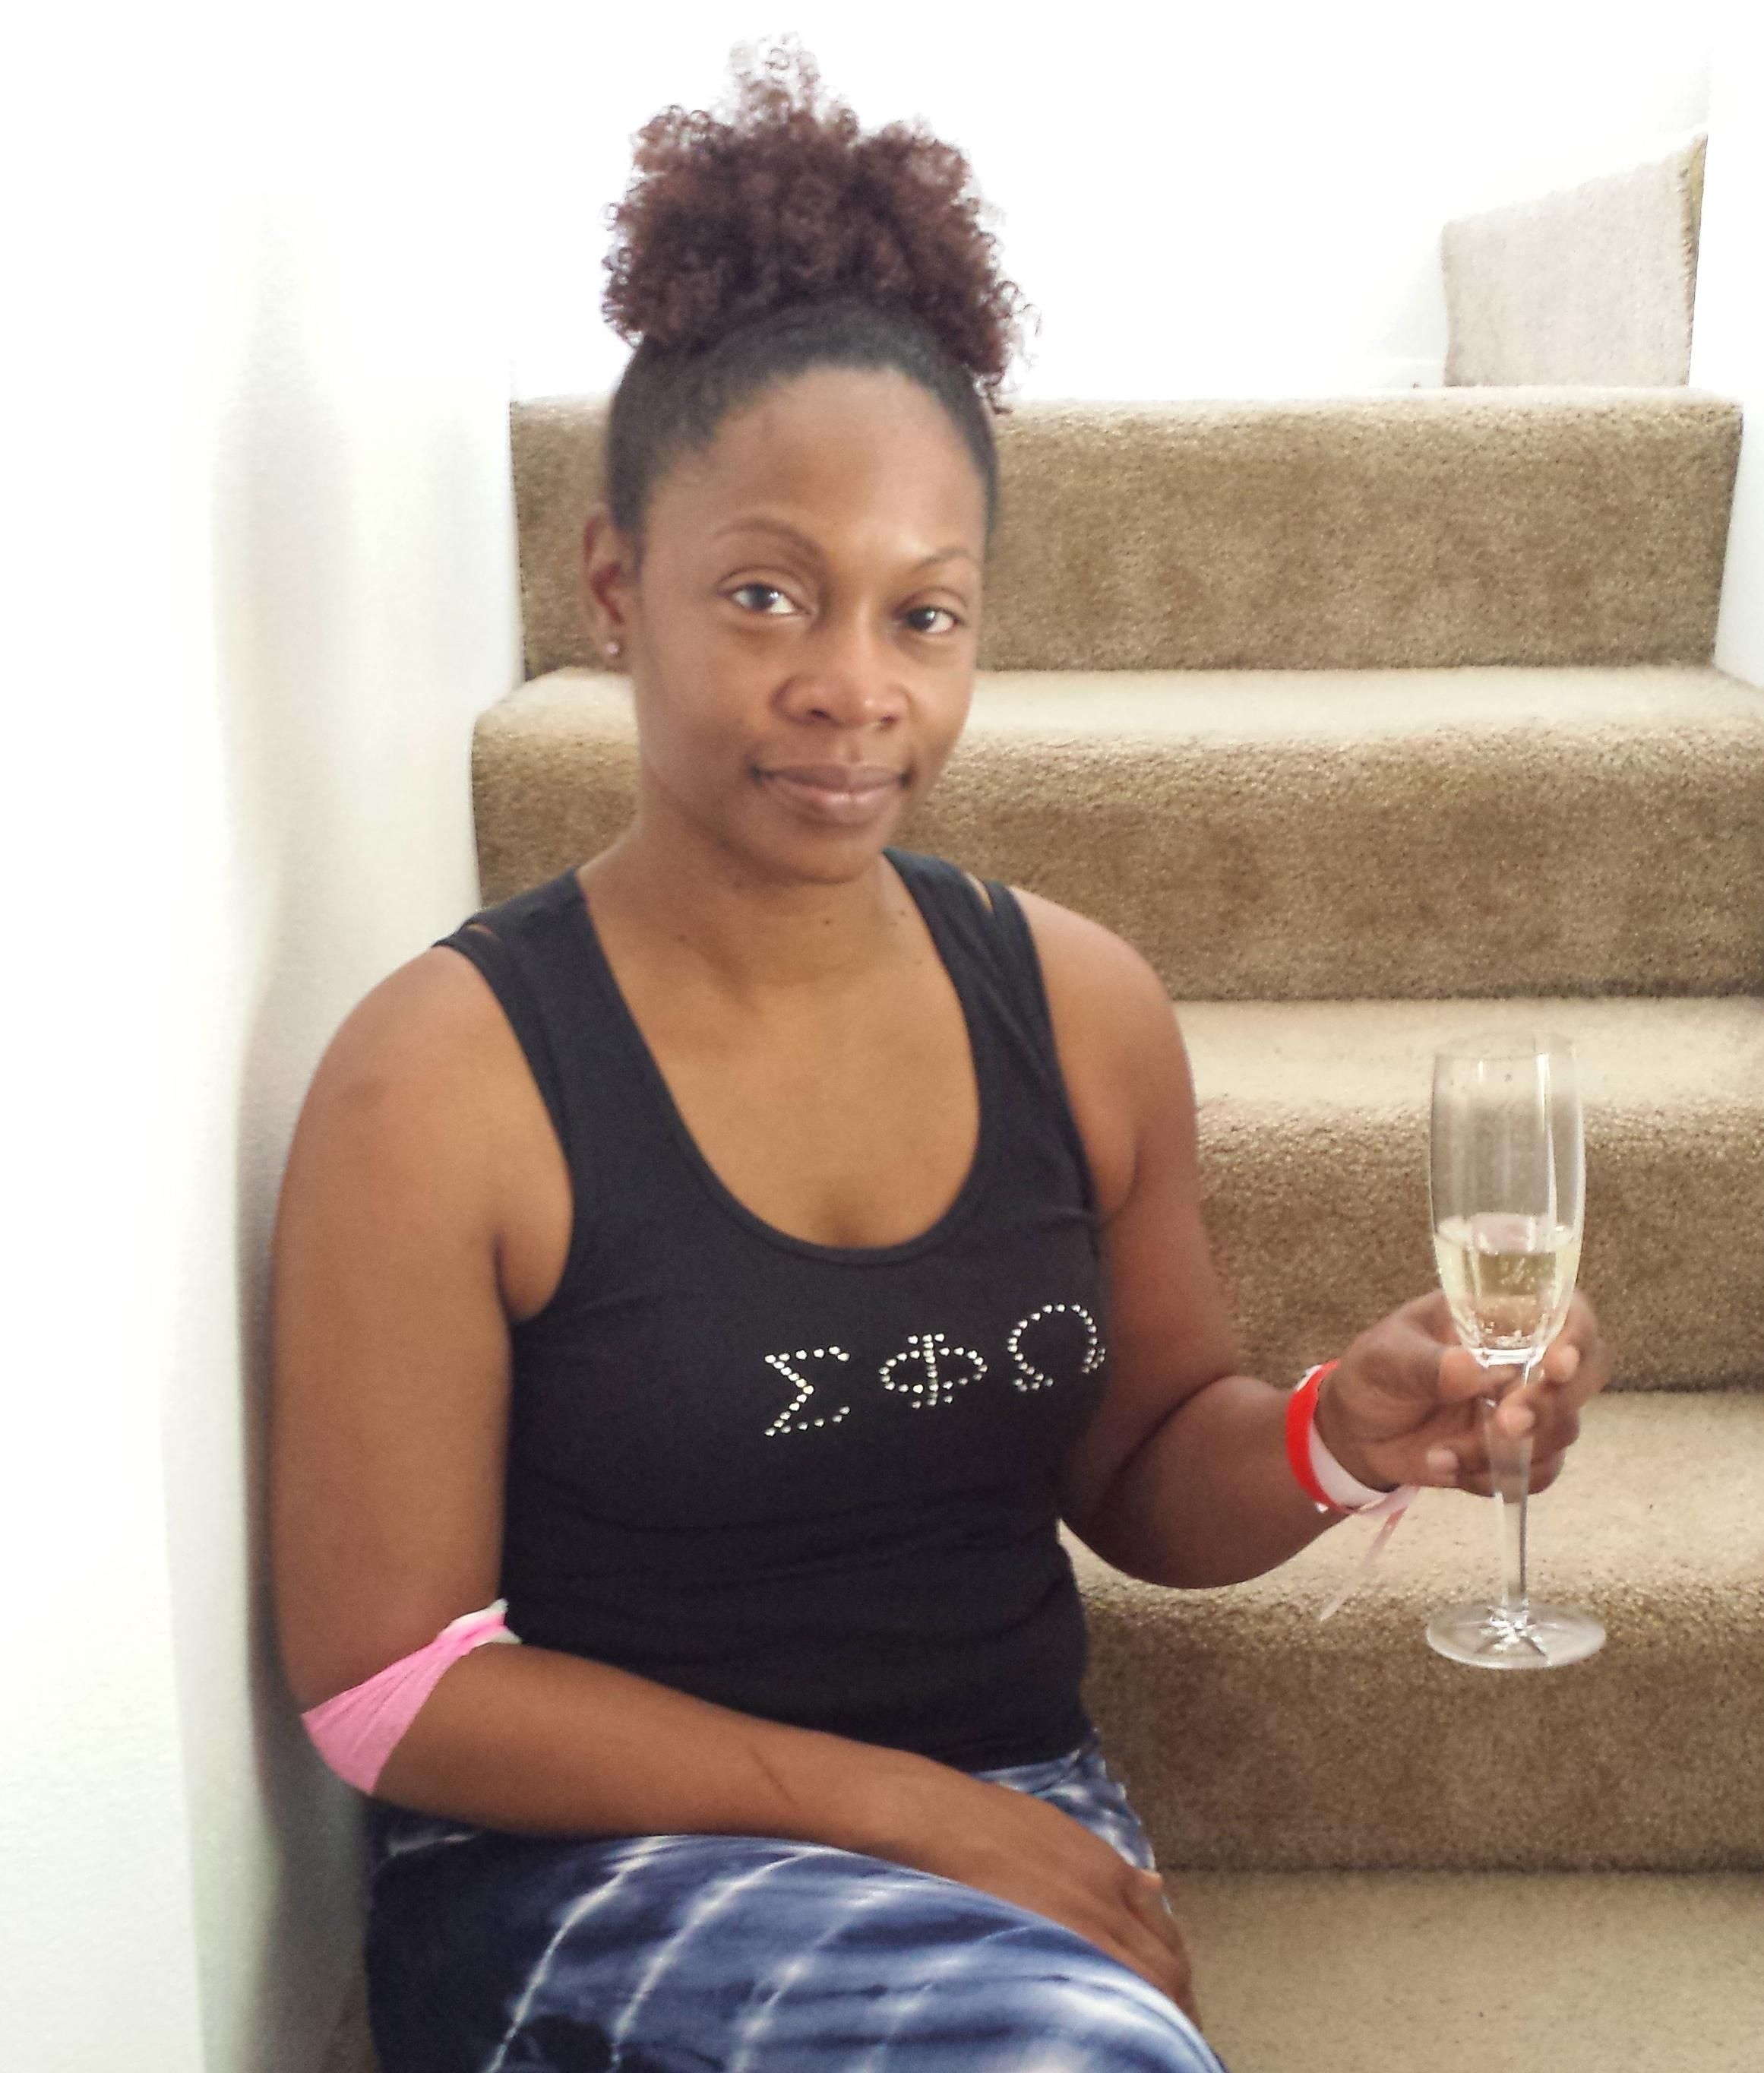 Kimberly celebrates the cancer that hit her ass with her champagne after she was diagnosed, July 24, 2015.